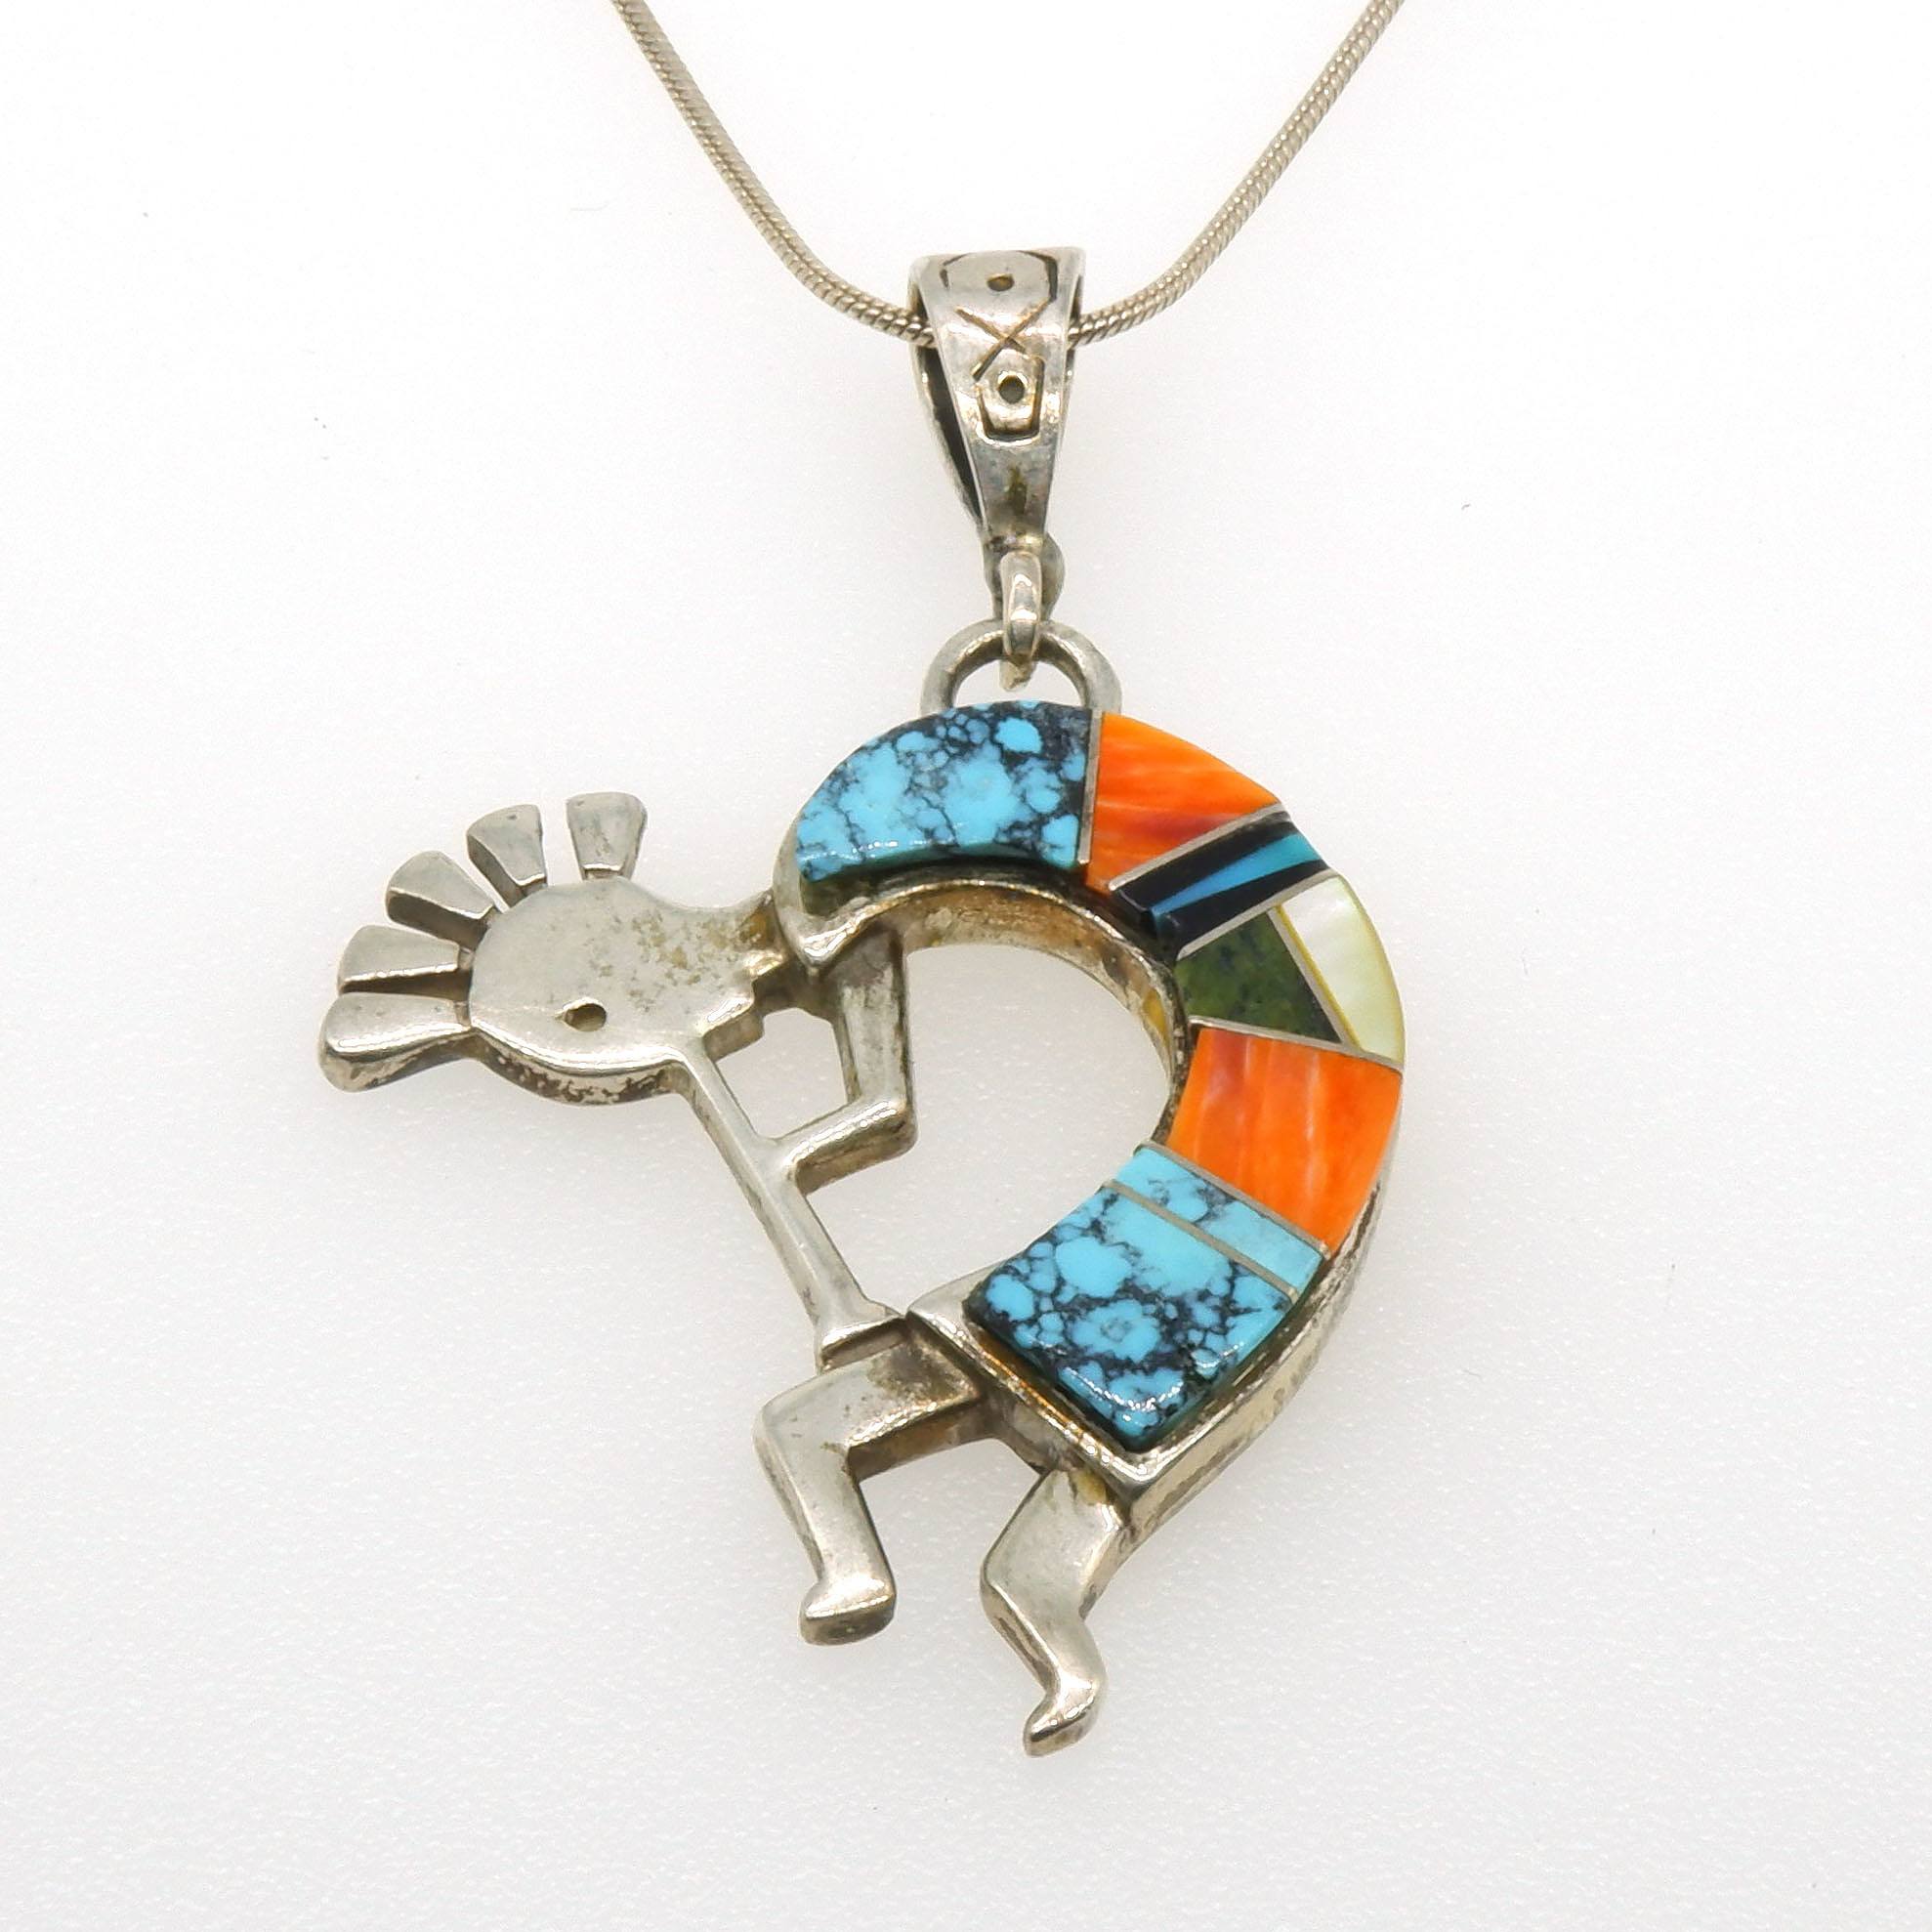 'Mexican Silver Figure Pendant with Mixed Gem Slabs, Including Turquoise and Jasper in a Curve'